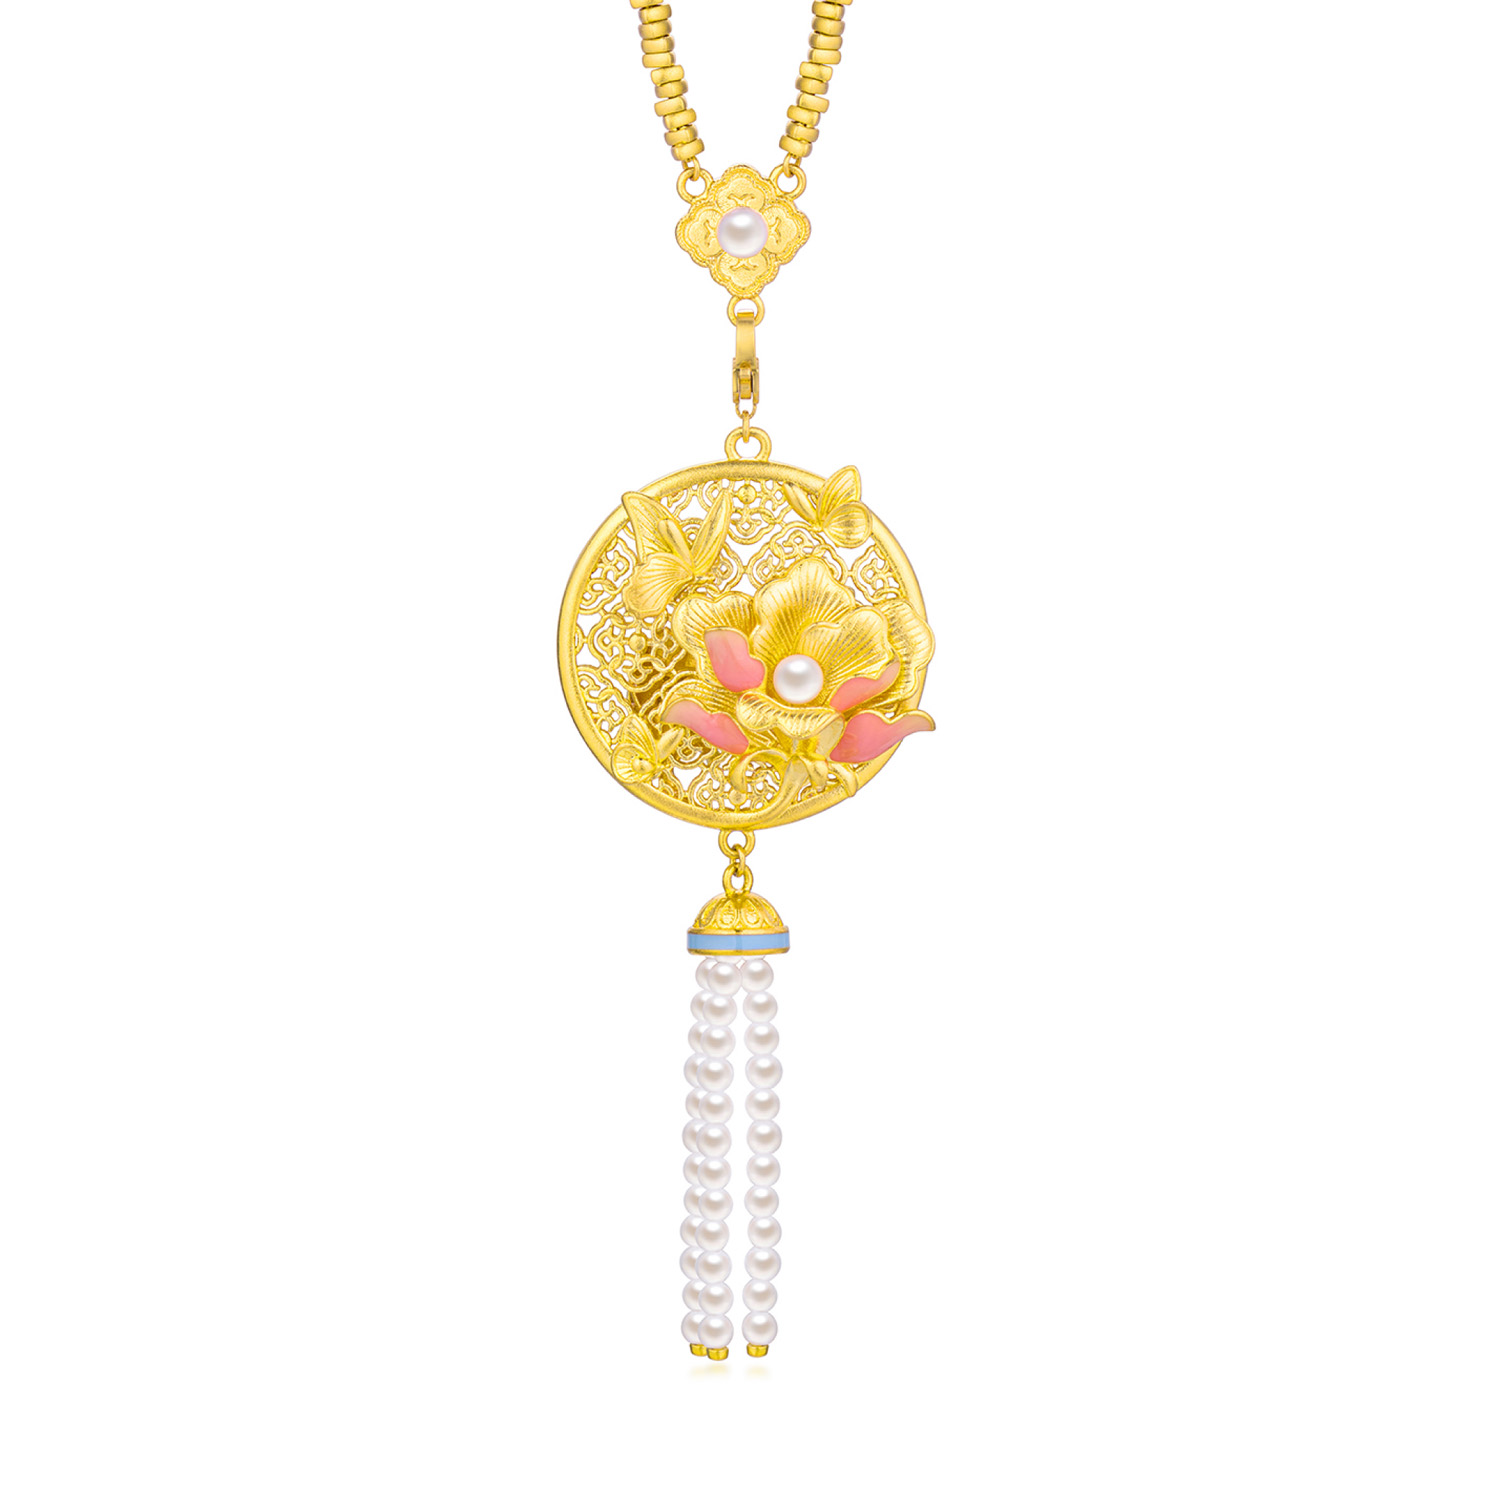 Heirloom Fortune - Charm of Song Dynasty Collection "Butterfly & Cotton Rose" Gold Pearl Pendant and Necklace